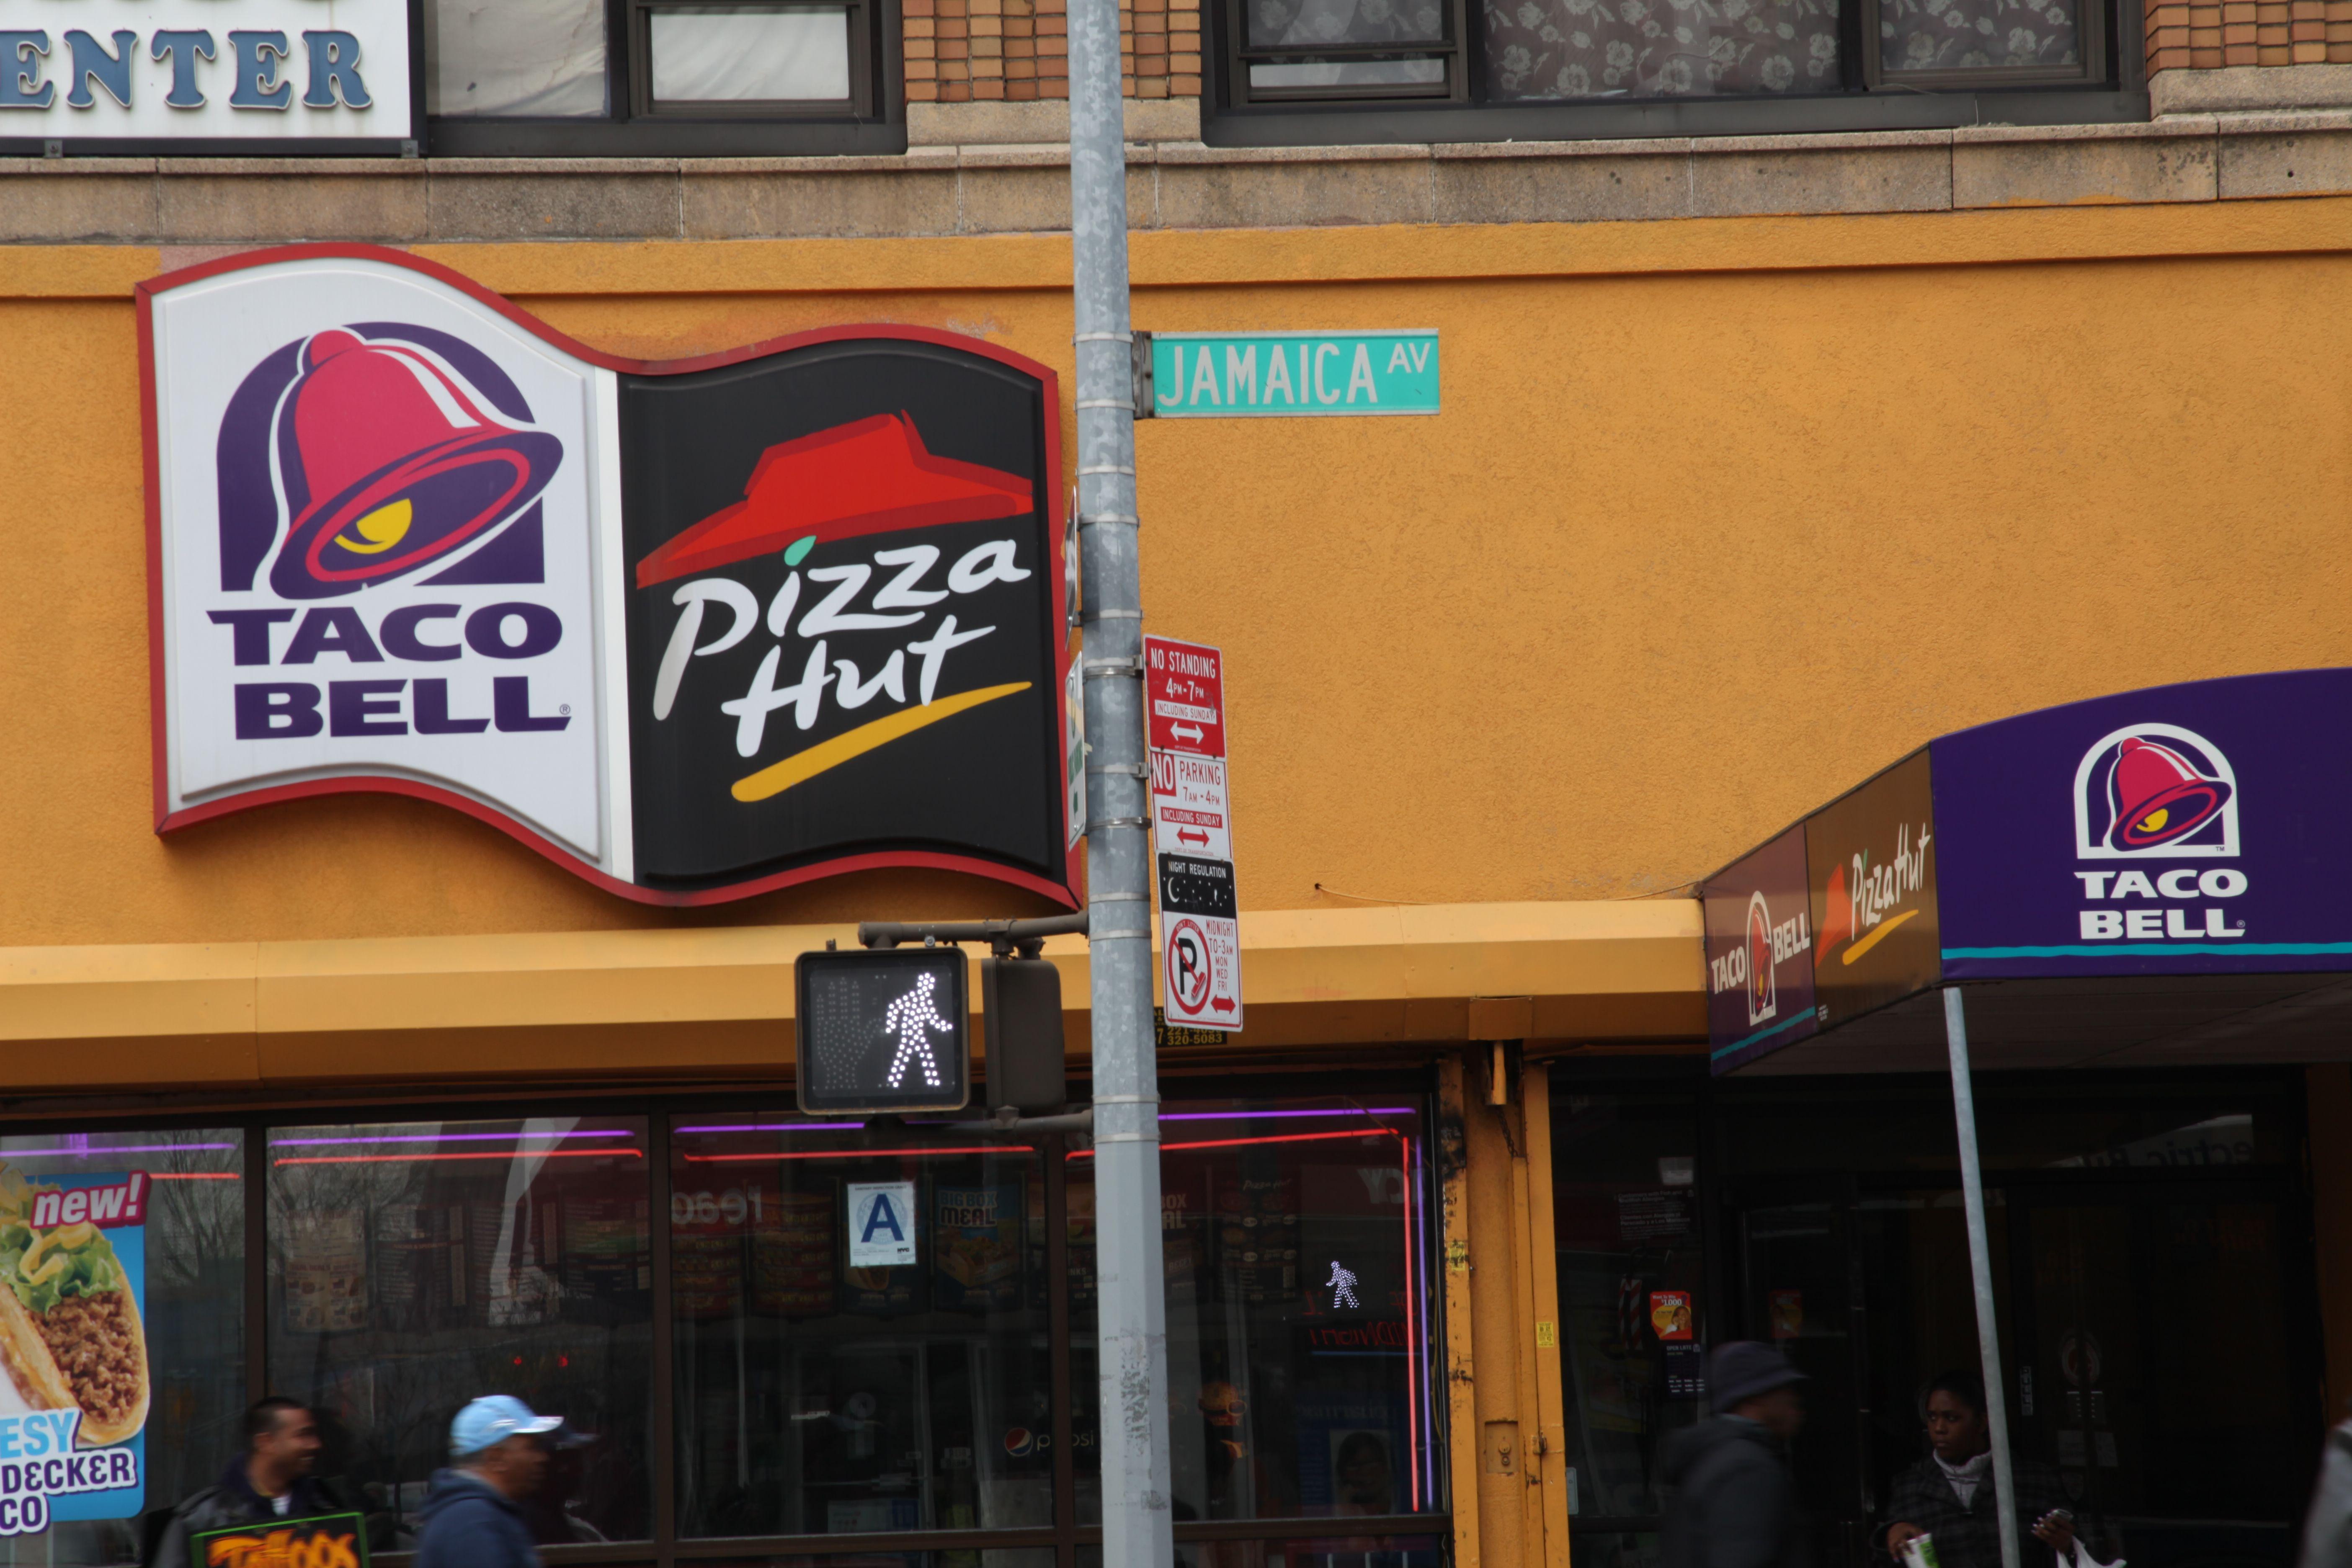 Pizza Hut Taco Bell Logo - Jamaica Avenue: Eat at the Combination Pizza Hut & Taco Bell ...